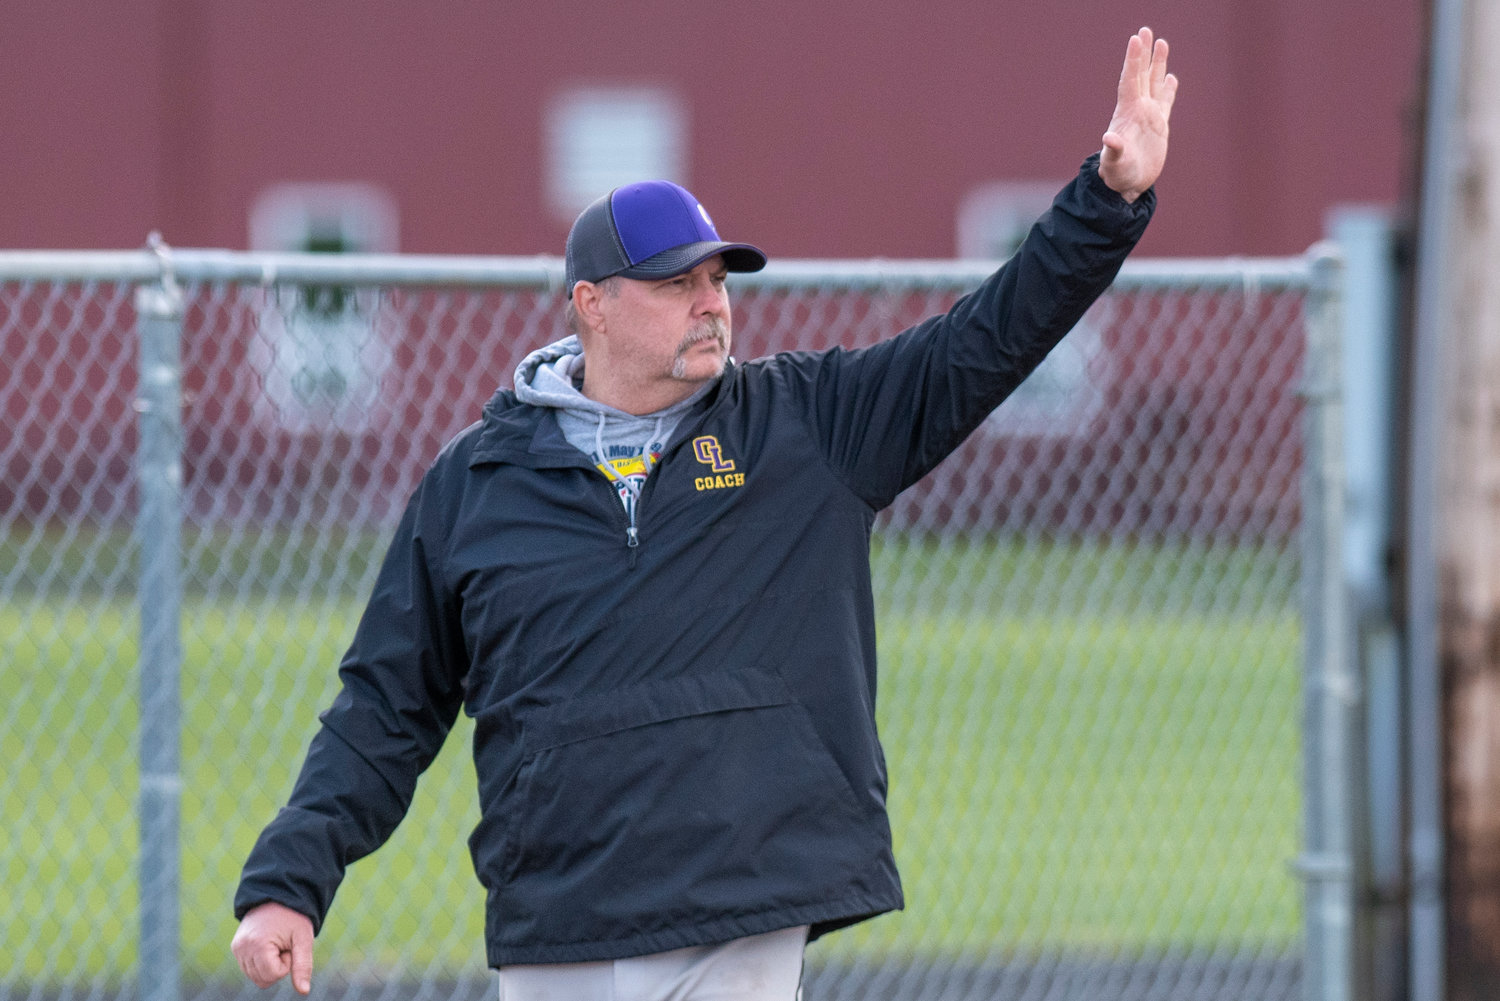 Onalaska softball coach Rich Teitzel signals to one of his baserunners during a home game against Mossyrock on April 15.